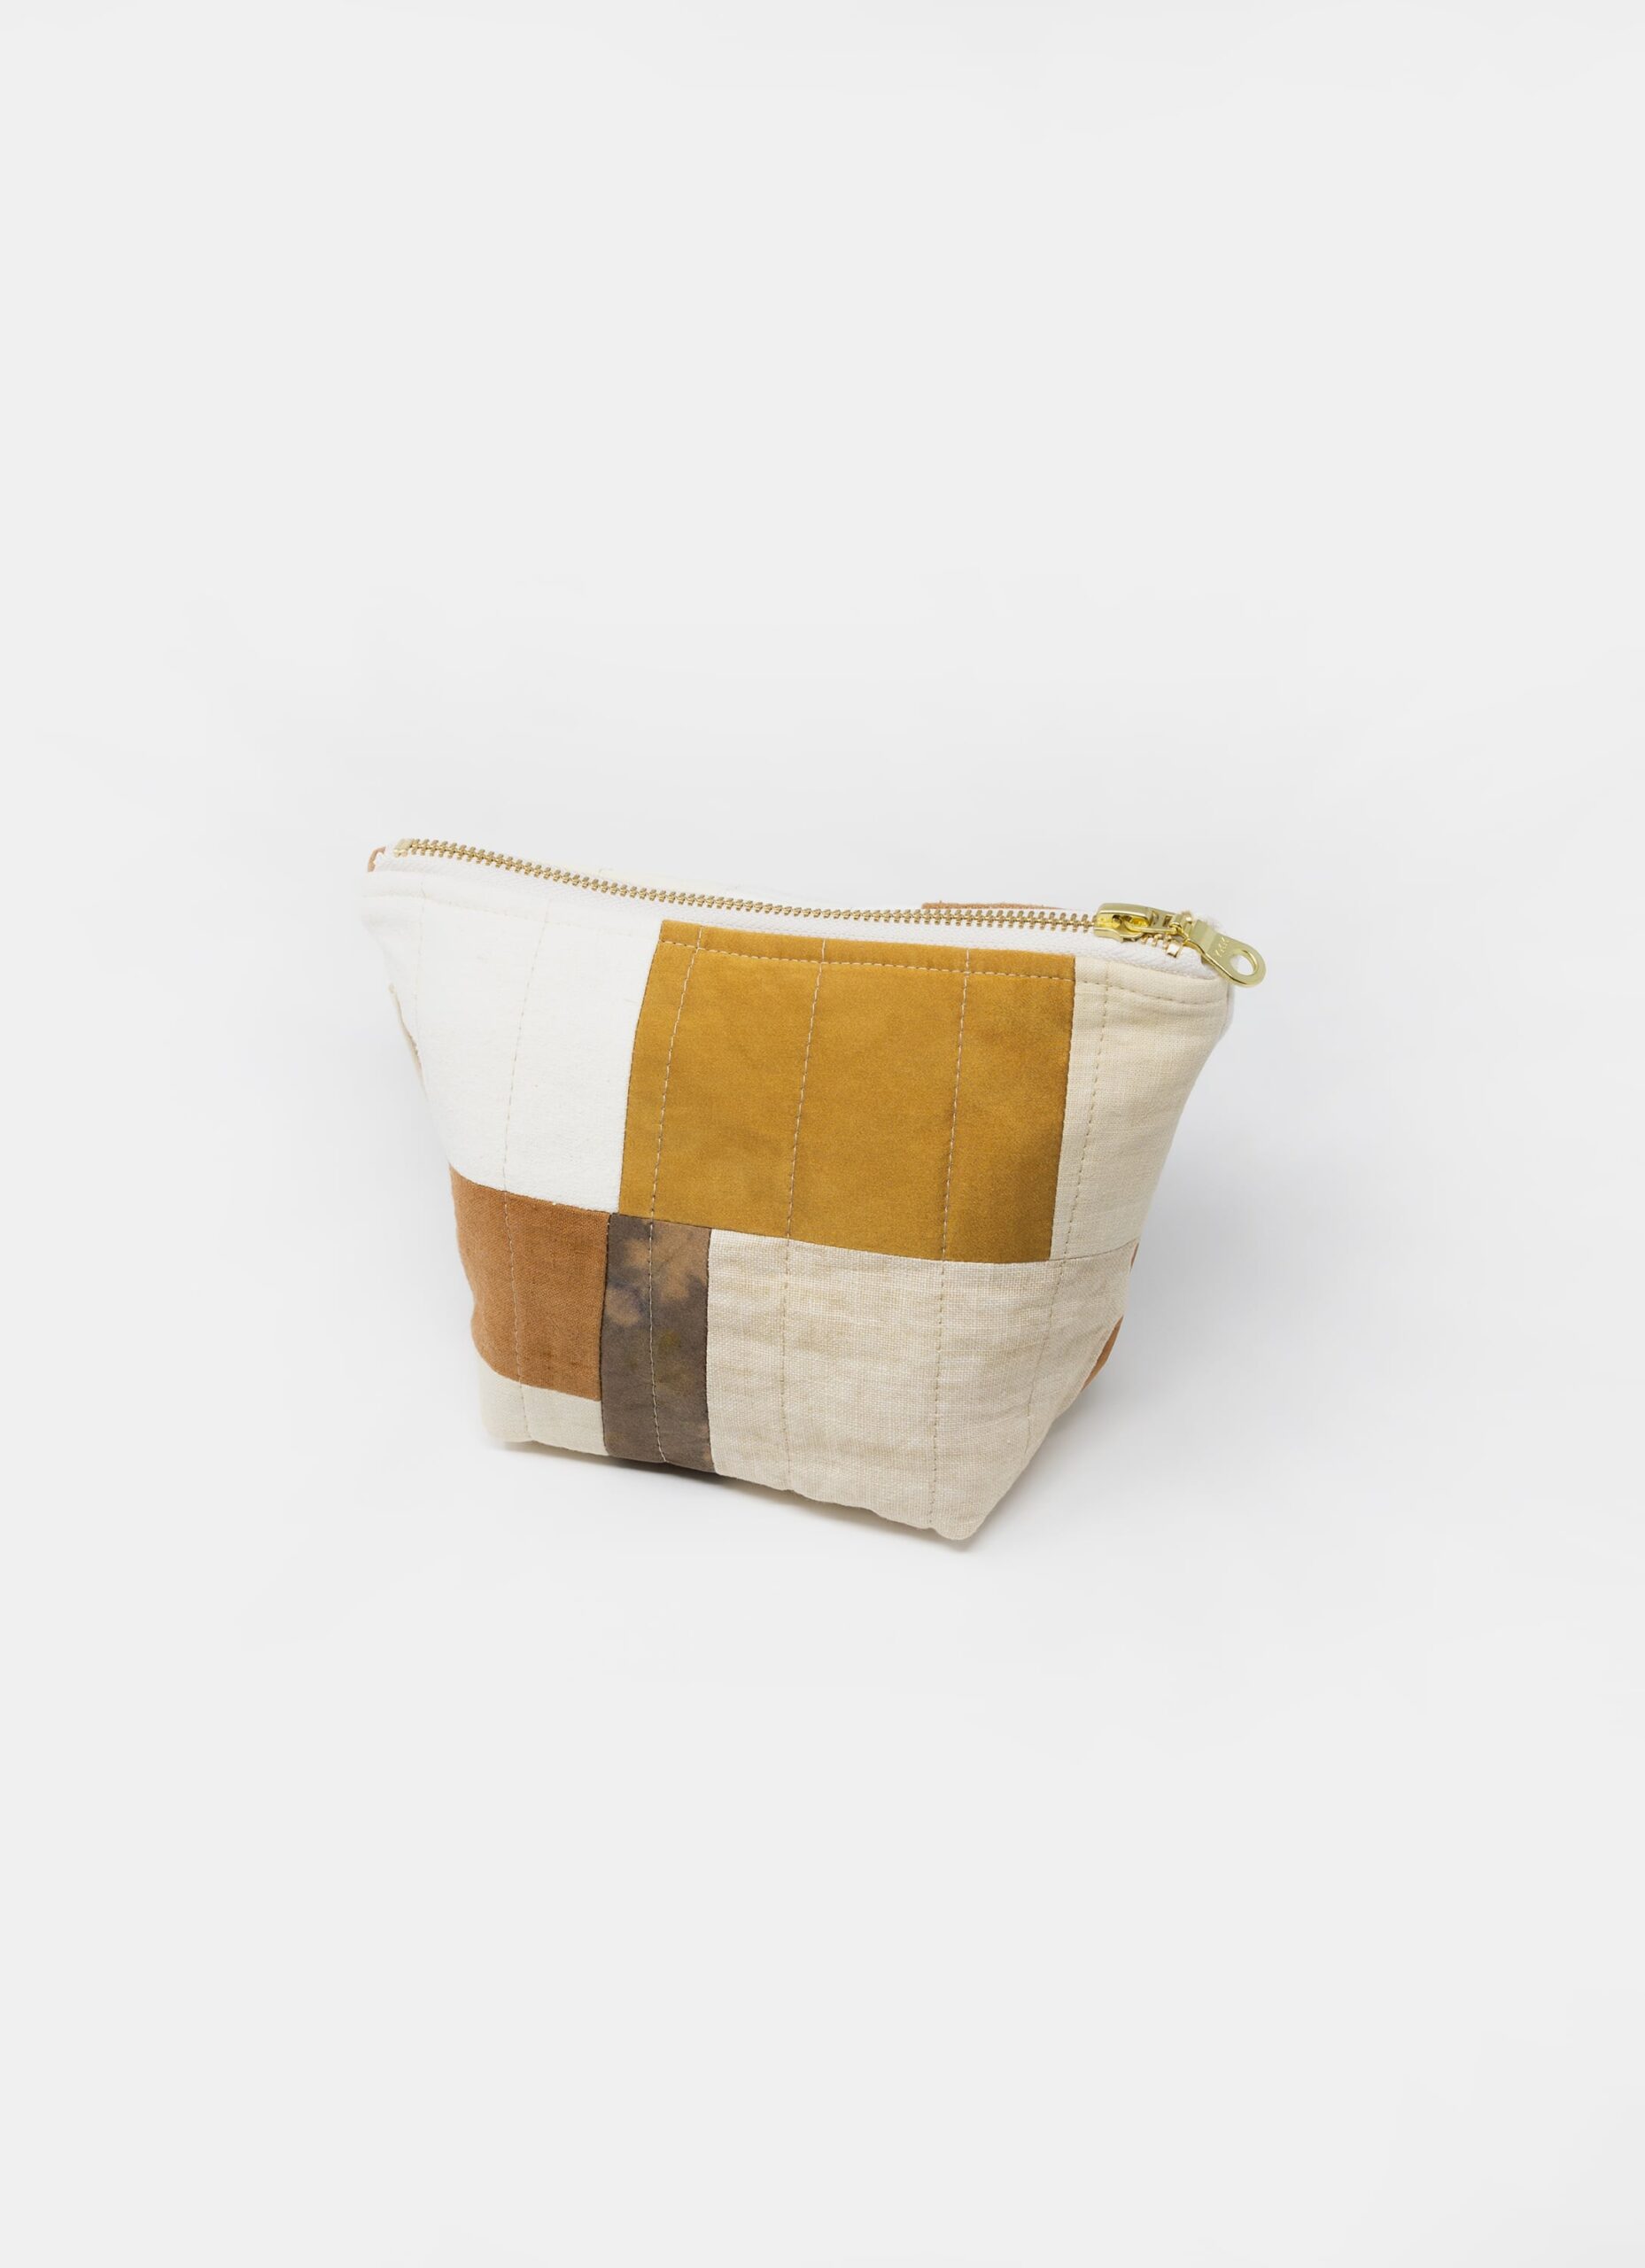 Marram - Patchwork Zipper Pouch - Plant dyed - Meadows collection - Earth tones